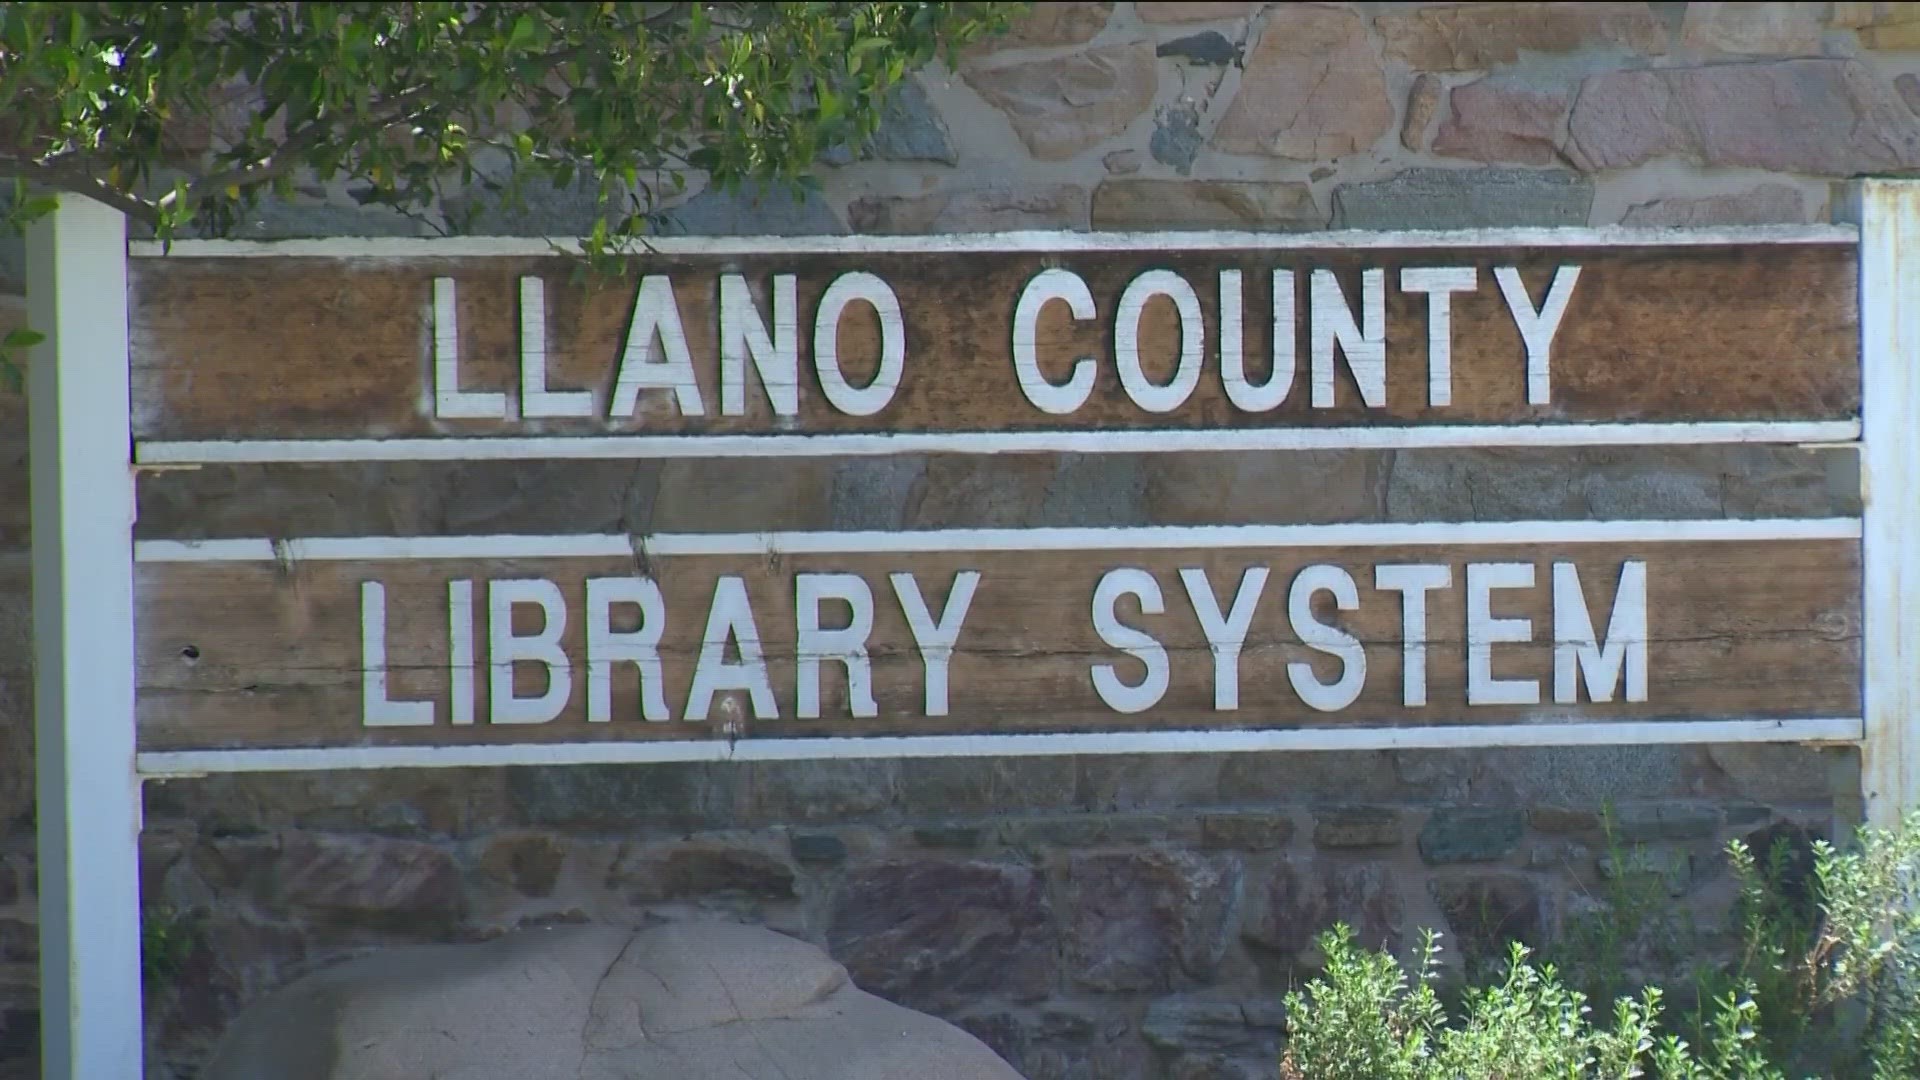 County commissioners voted to remove an item related to closing libraries from their agenda on Thursday.